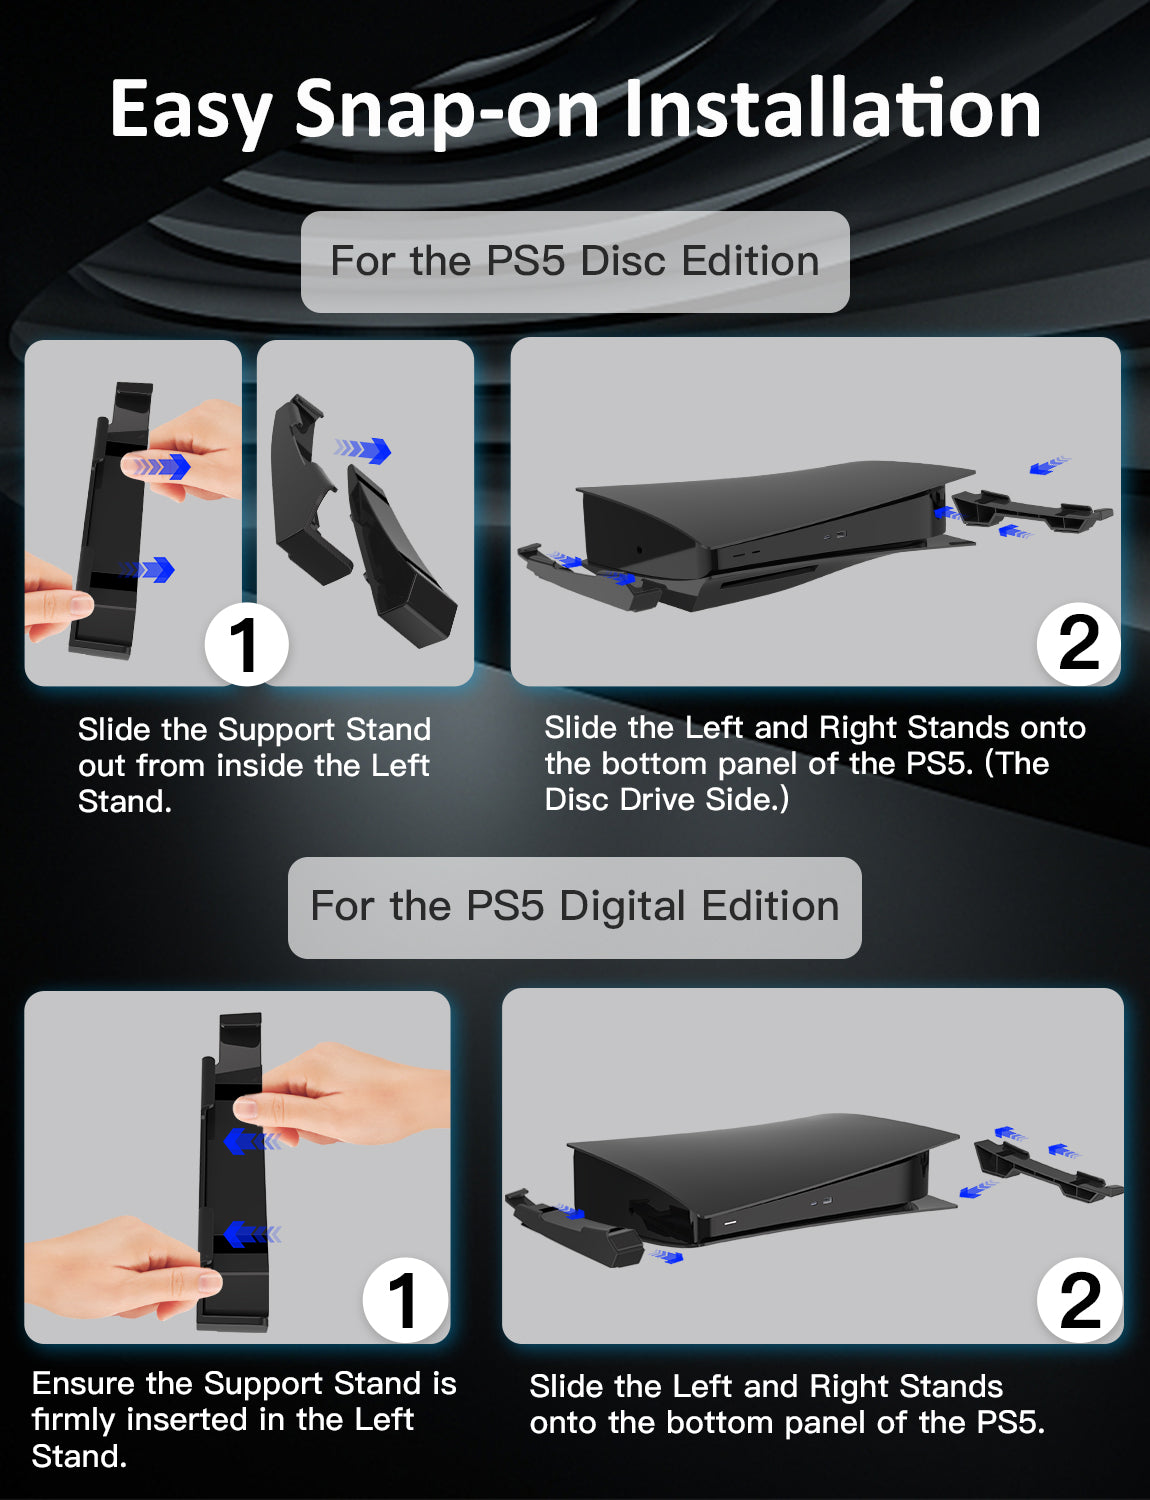 Here's a guide to the horizontal stand installation (for PS5 Disc Edition and Digital Edition).